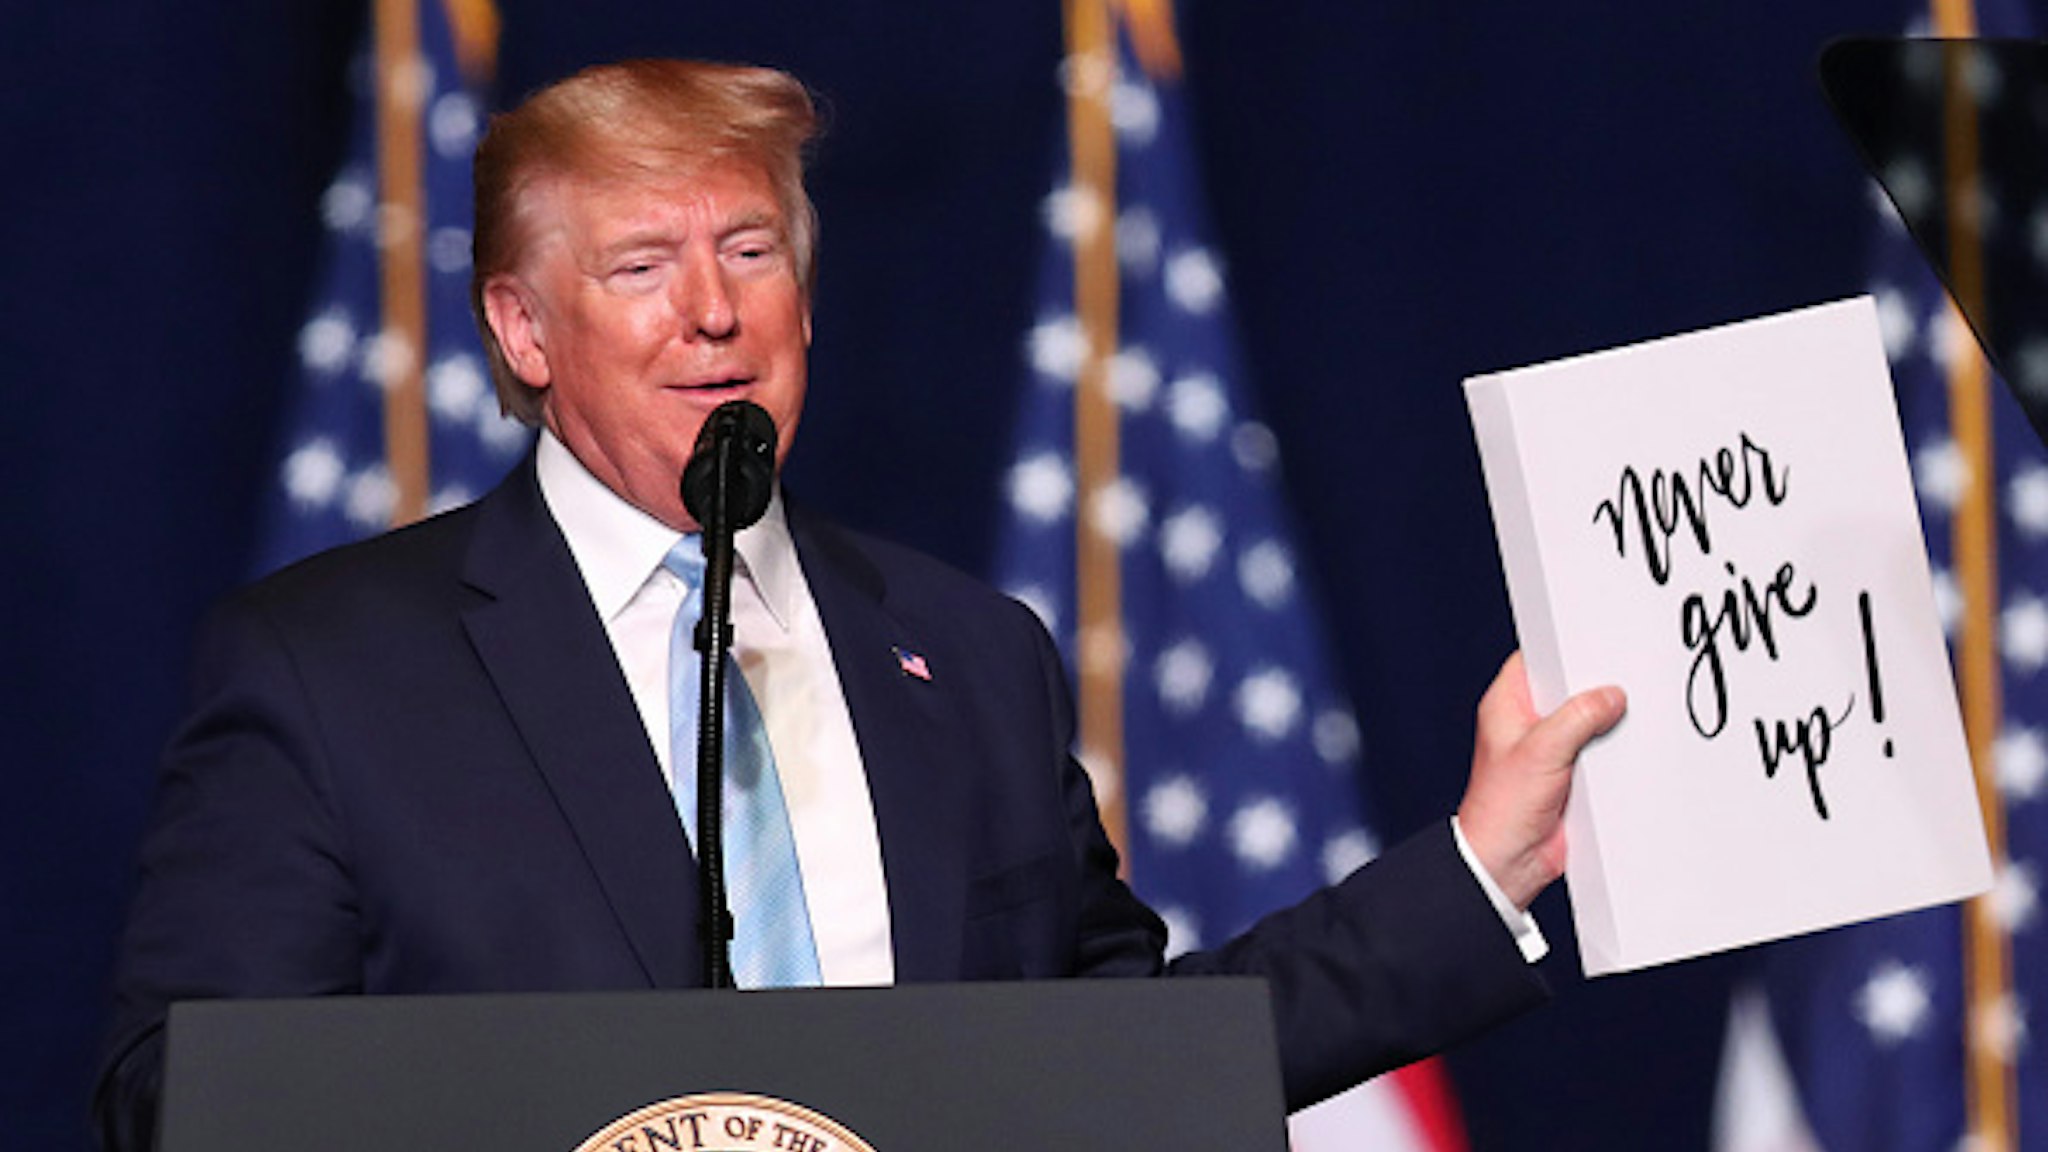 MIAMI, FLORIDA - JANUARY 03: President Donald Trump holds up a sign reading, 'never give up!,' given to him during a 'Evangelicals for Trump' campaign event held at the King Jesus International Ministry on January 03, 2020 in Miami, Florida. The rally was announced after a December editorial published in Christianity Today called for the President Trump's removal from office.